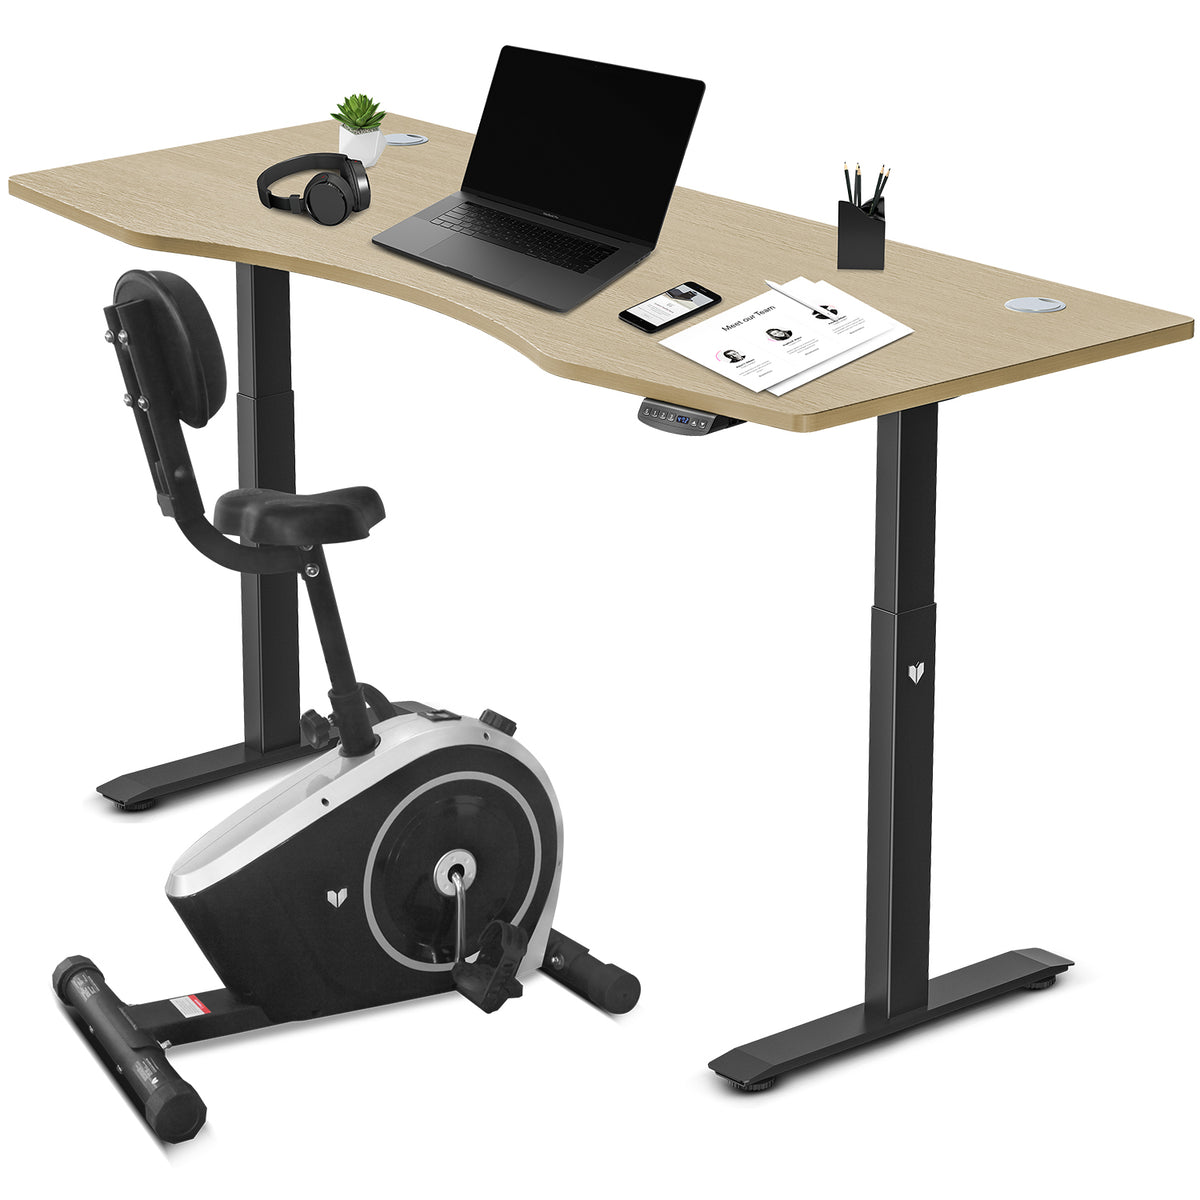 Lifespan Fitness Cyclestation 3 Exercise Bike with ErgoDesk Automatic Standing Desk 180cm in Oak/Black